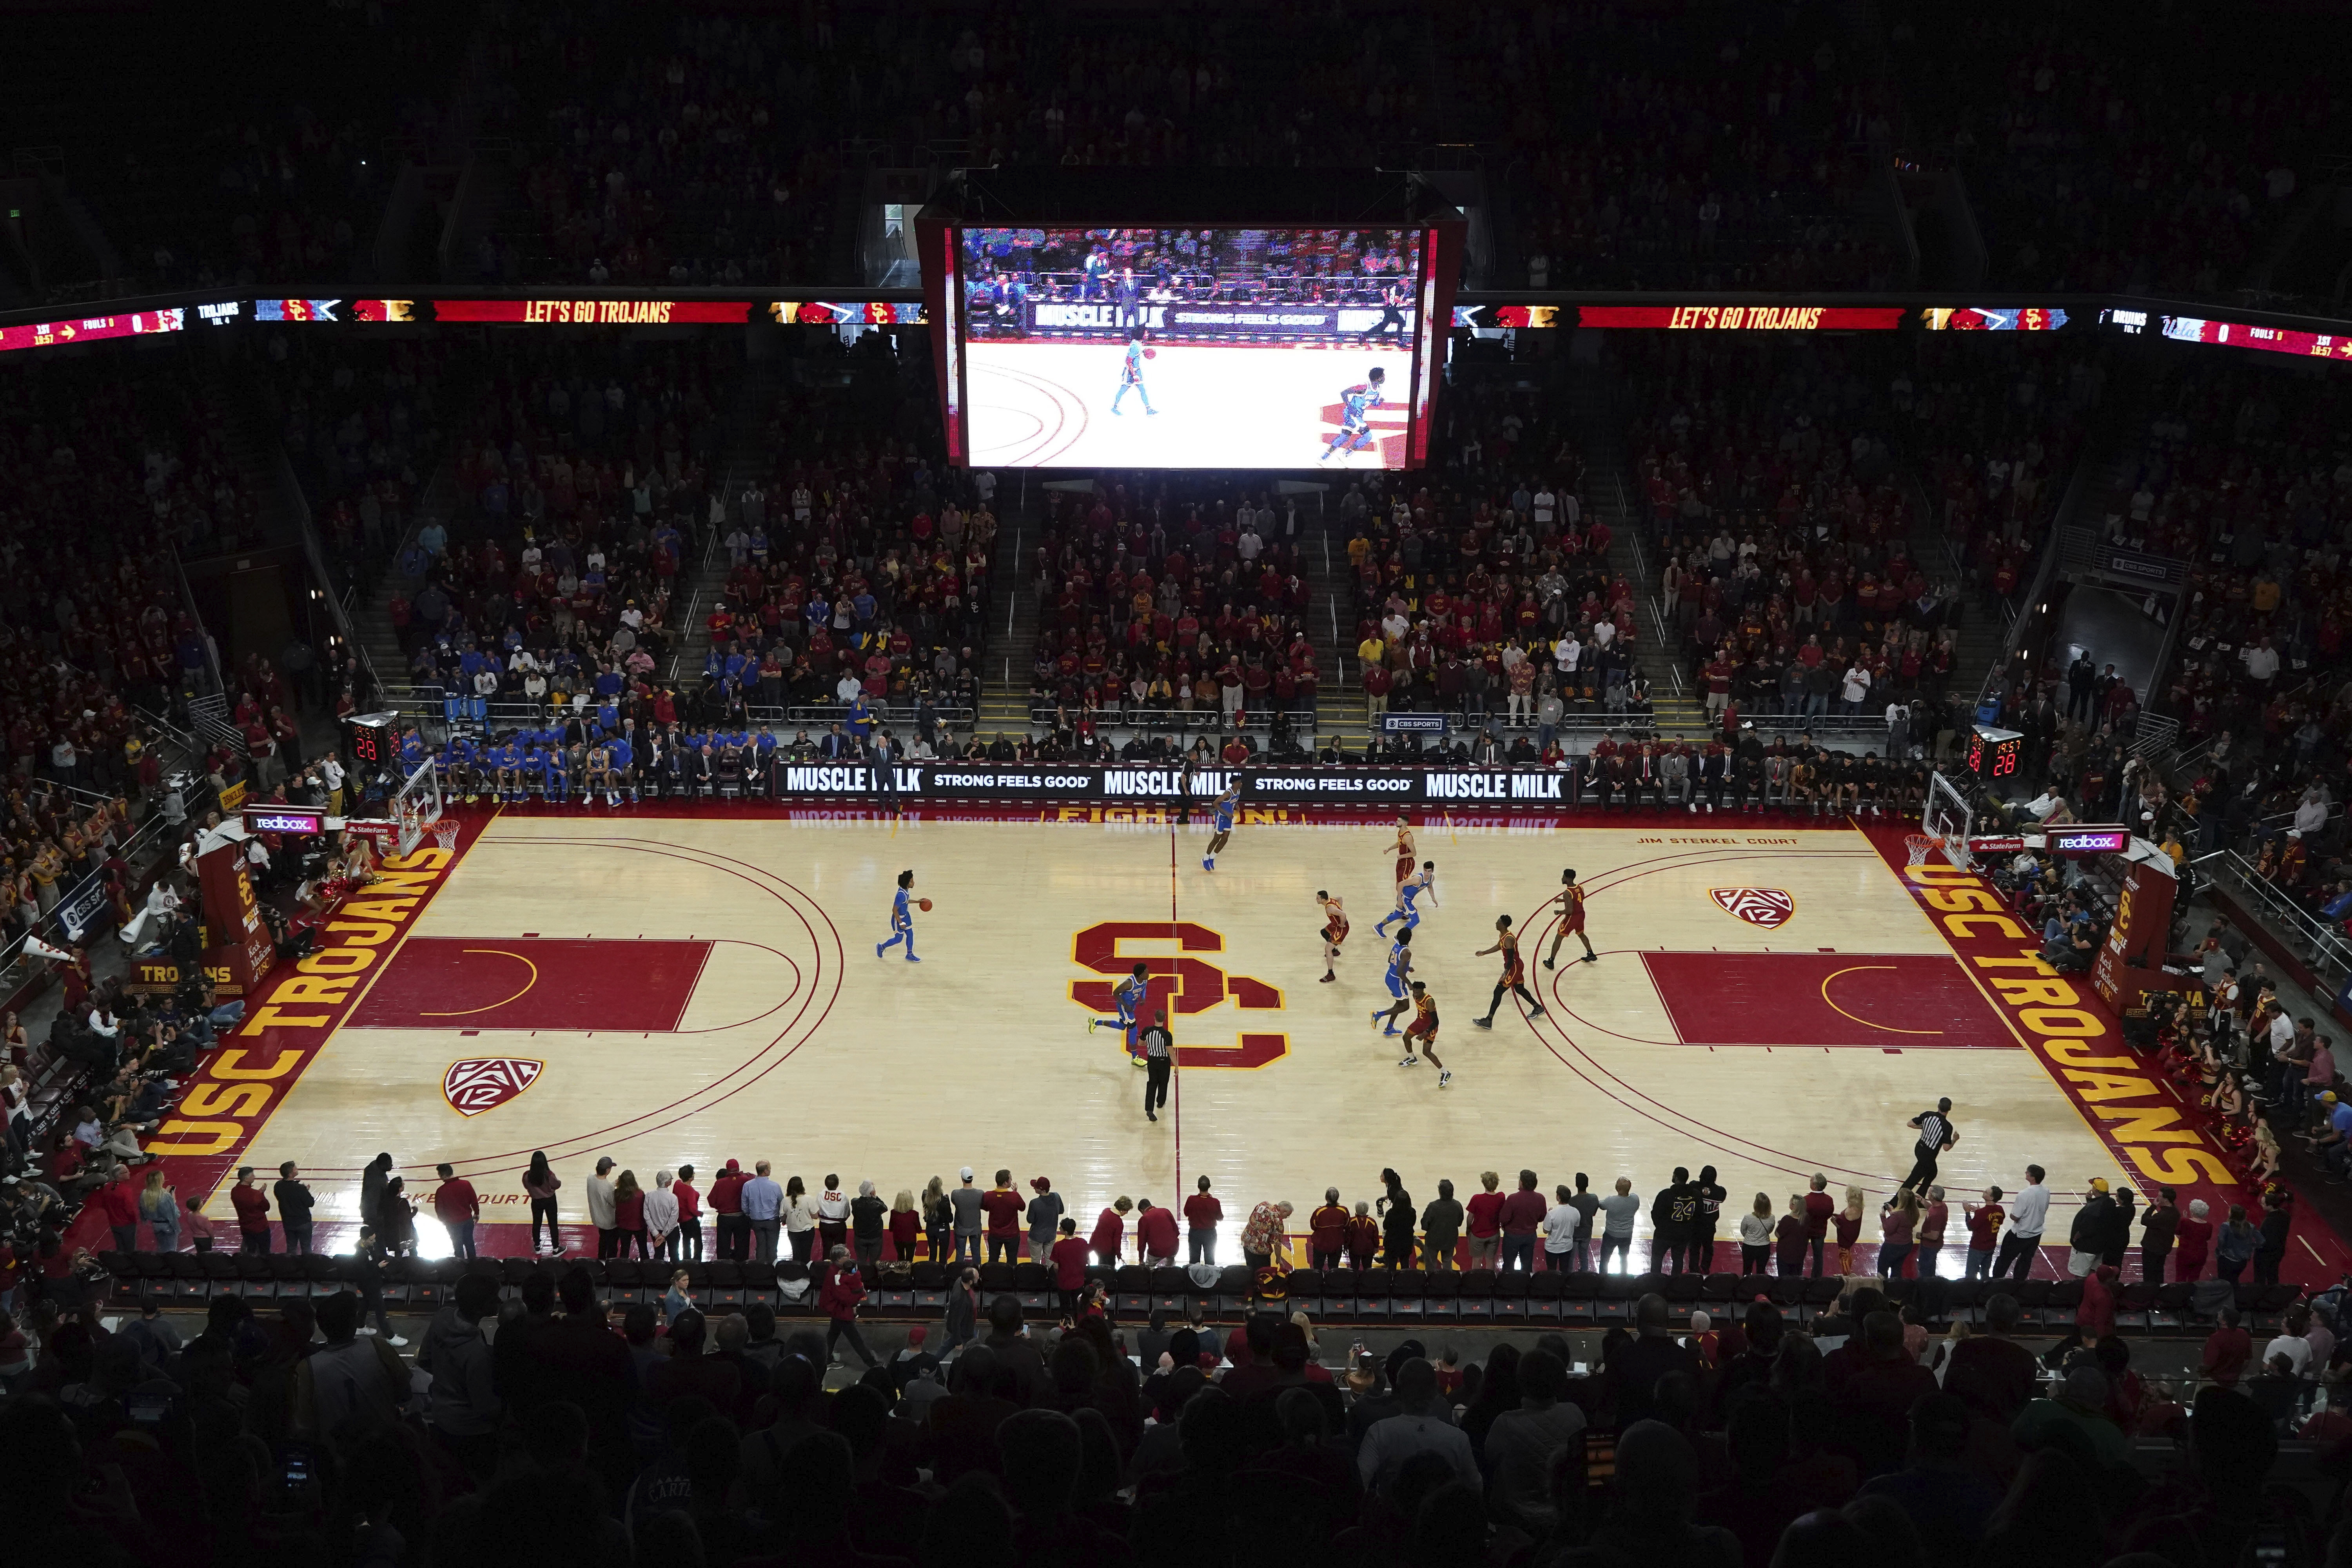 The University of Southern California Trojans and the UCLA Bruins play an NCAA basketball game in Los Angeles on March 7.